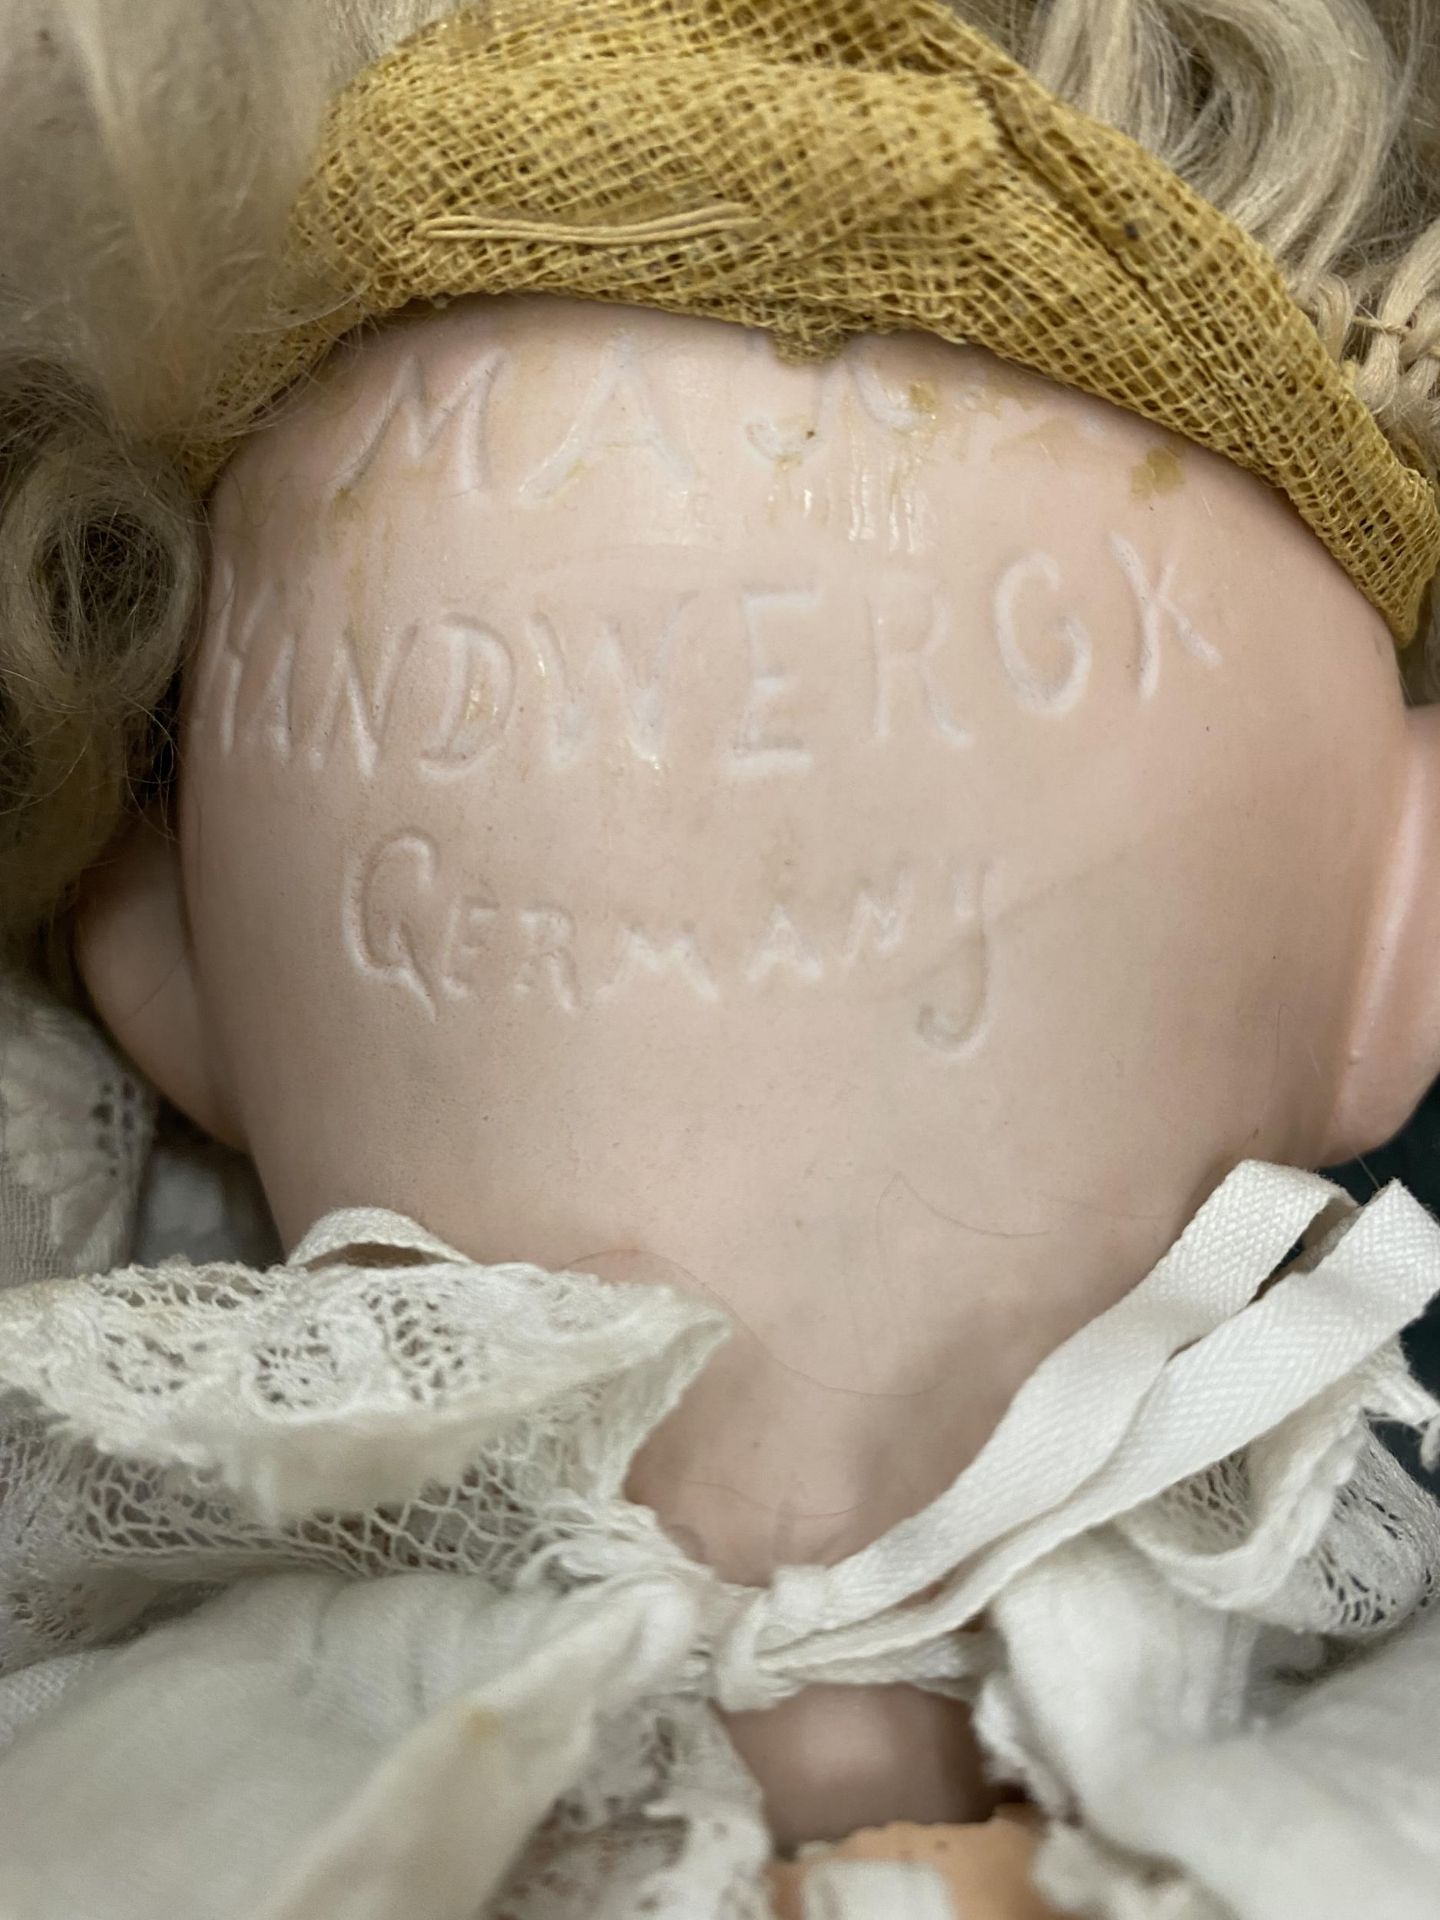 TWO LARGE VINTAGE DOLLS, ONE MARKED MAX HANDWERGY, GERMANY, THE OTHER MARKED HEUBACH KOPPELSDORF - Image 7 of 7